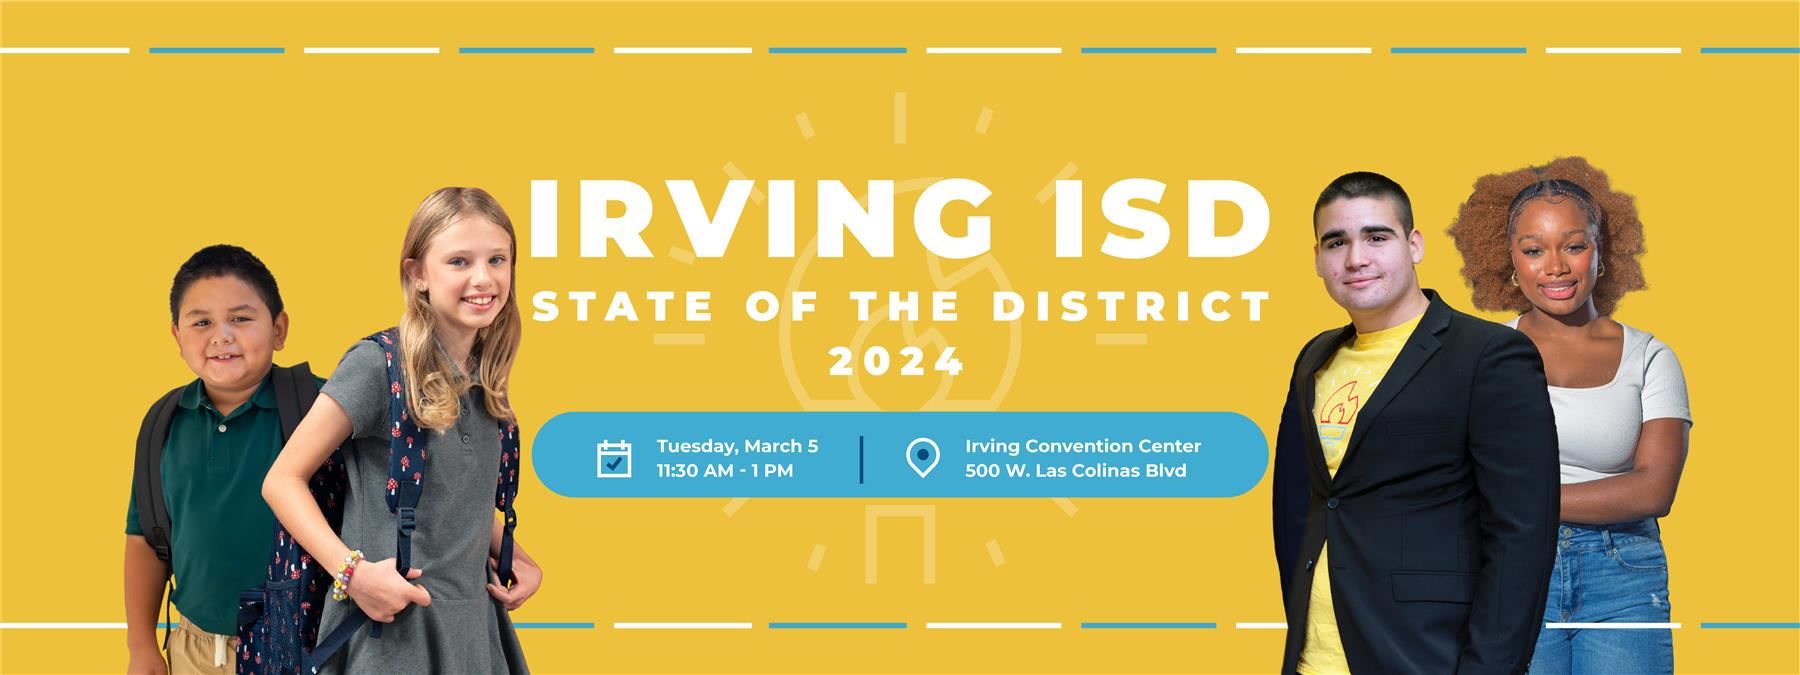 Irving ISD State of the District - Tuesday March 5